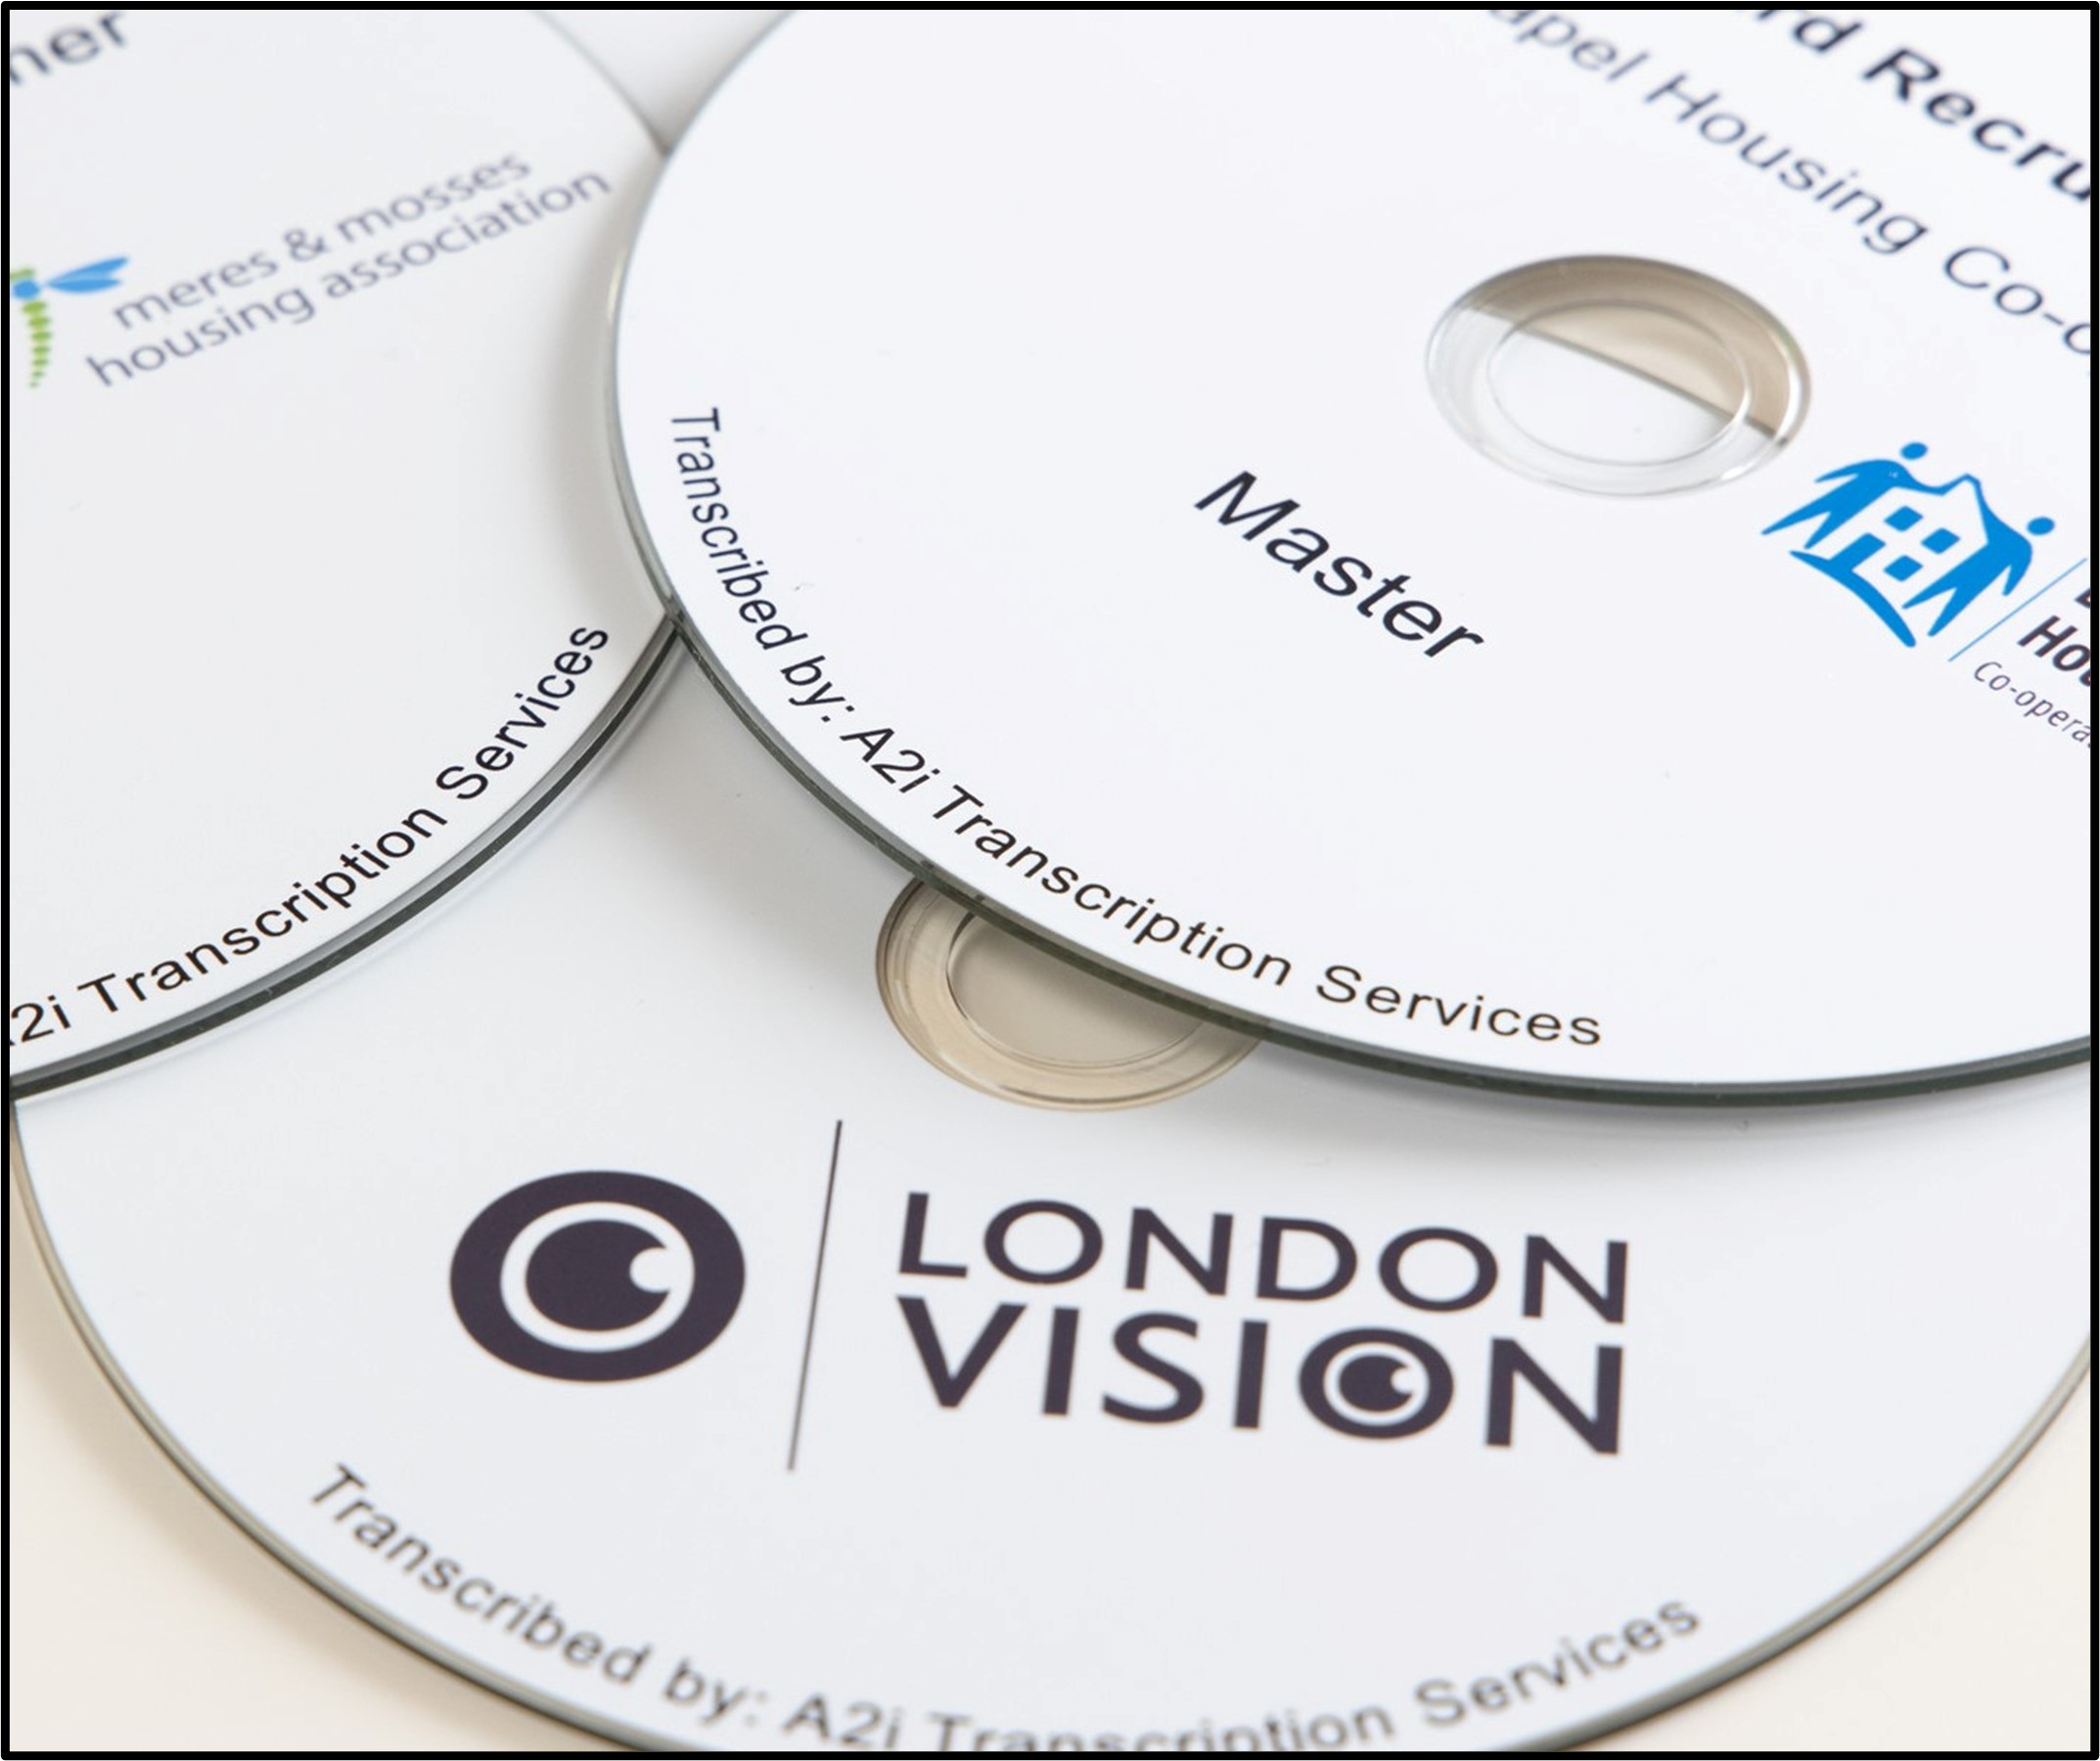 Image of several standard Audio CD's with black text and colourful logos on white backgrounds